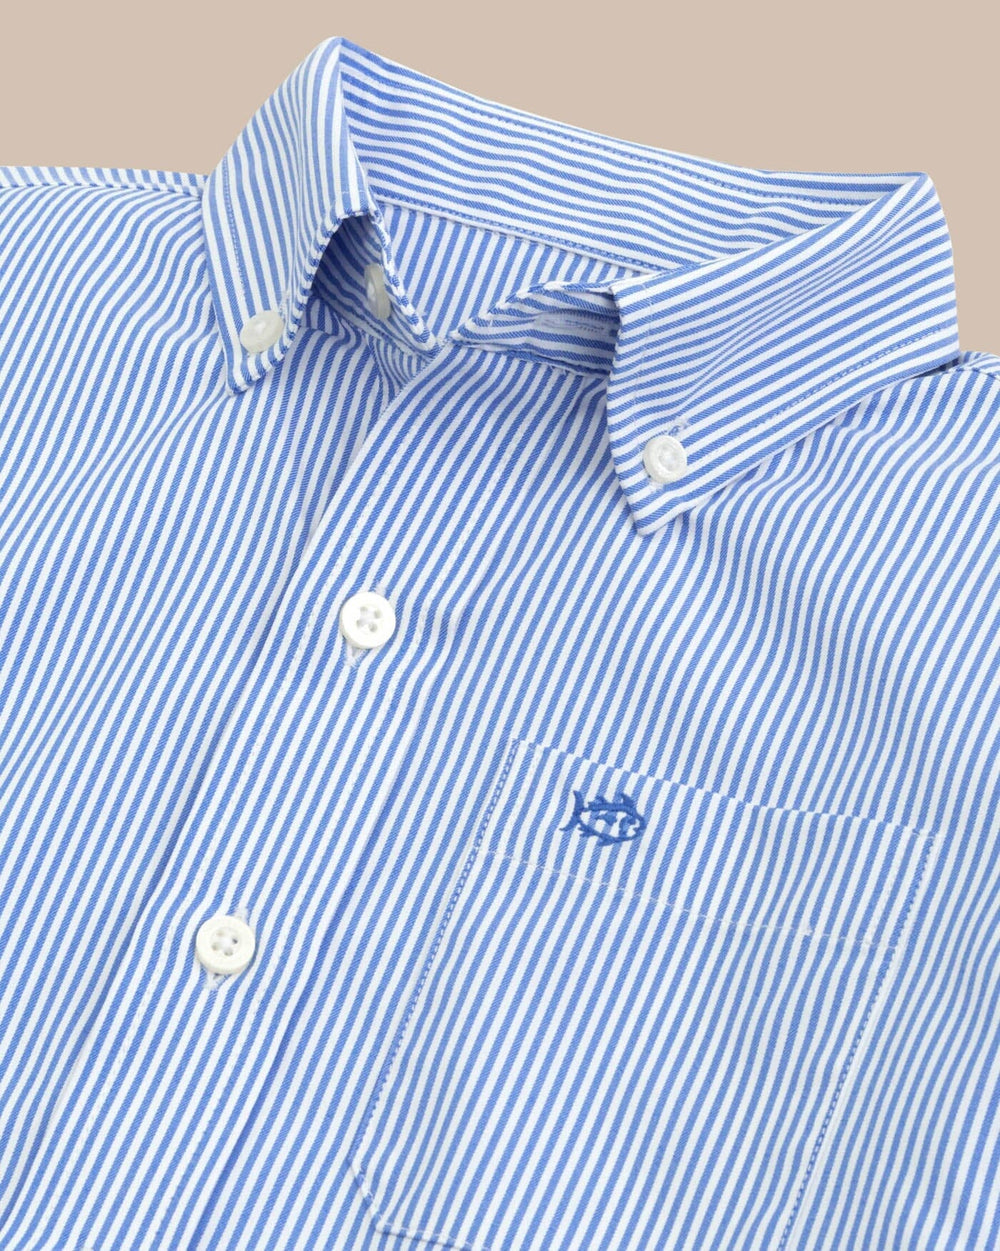 The detail view of the Southern Tide Youth Bengal Stripe Intercoastal Sport Shirt by Southern Tide - Cobalt Blue